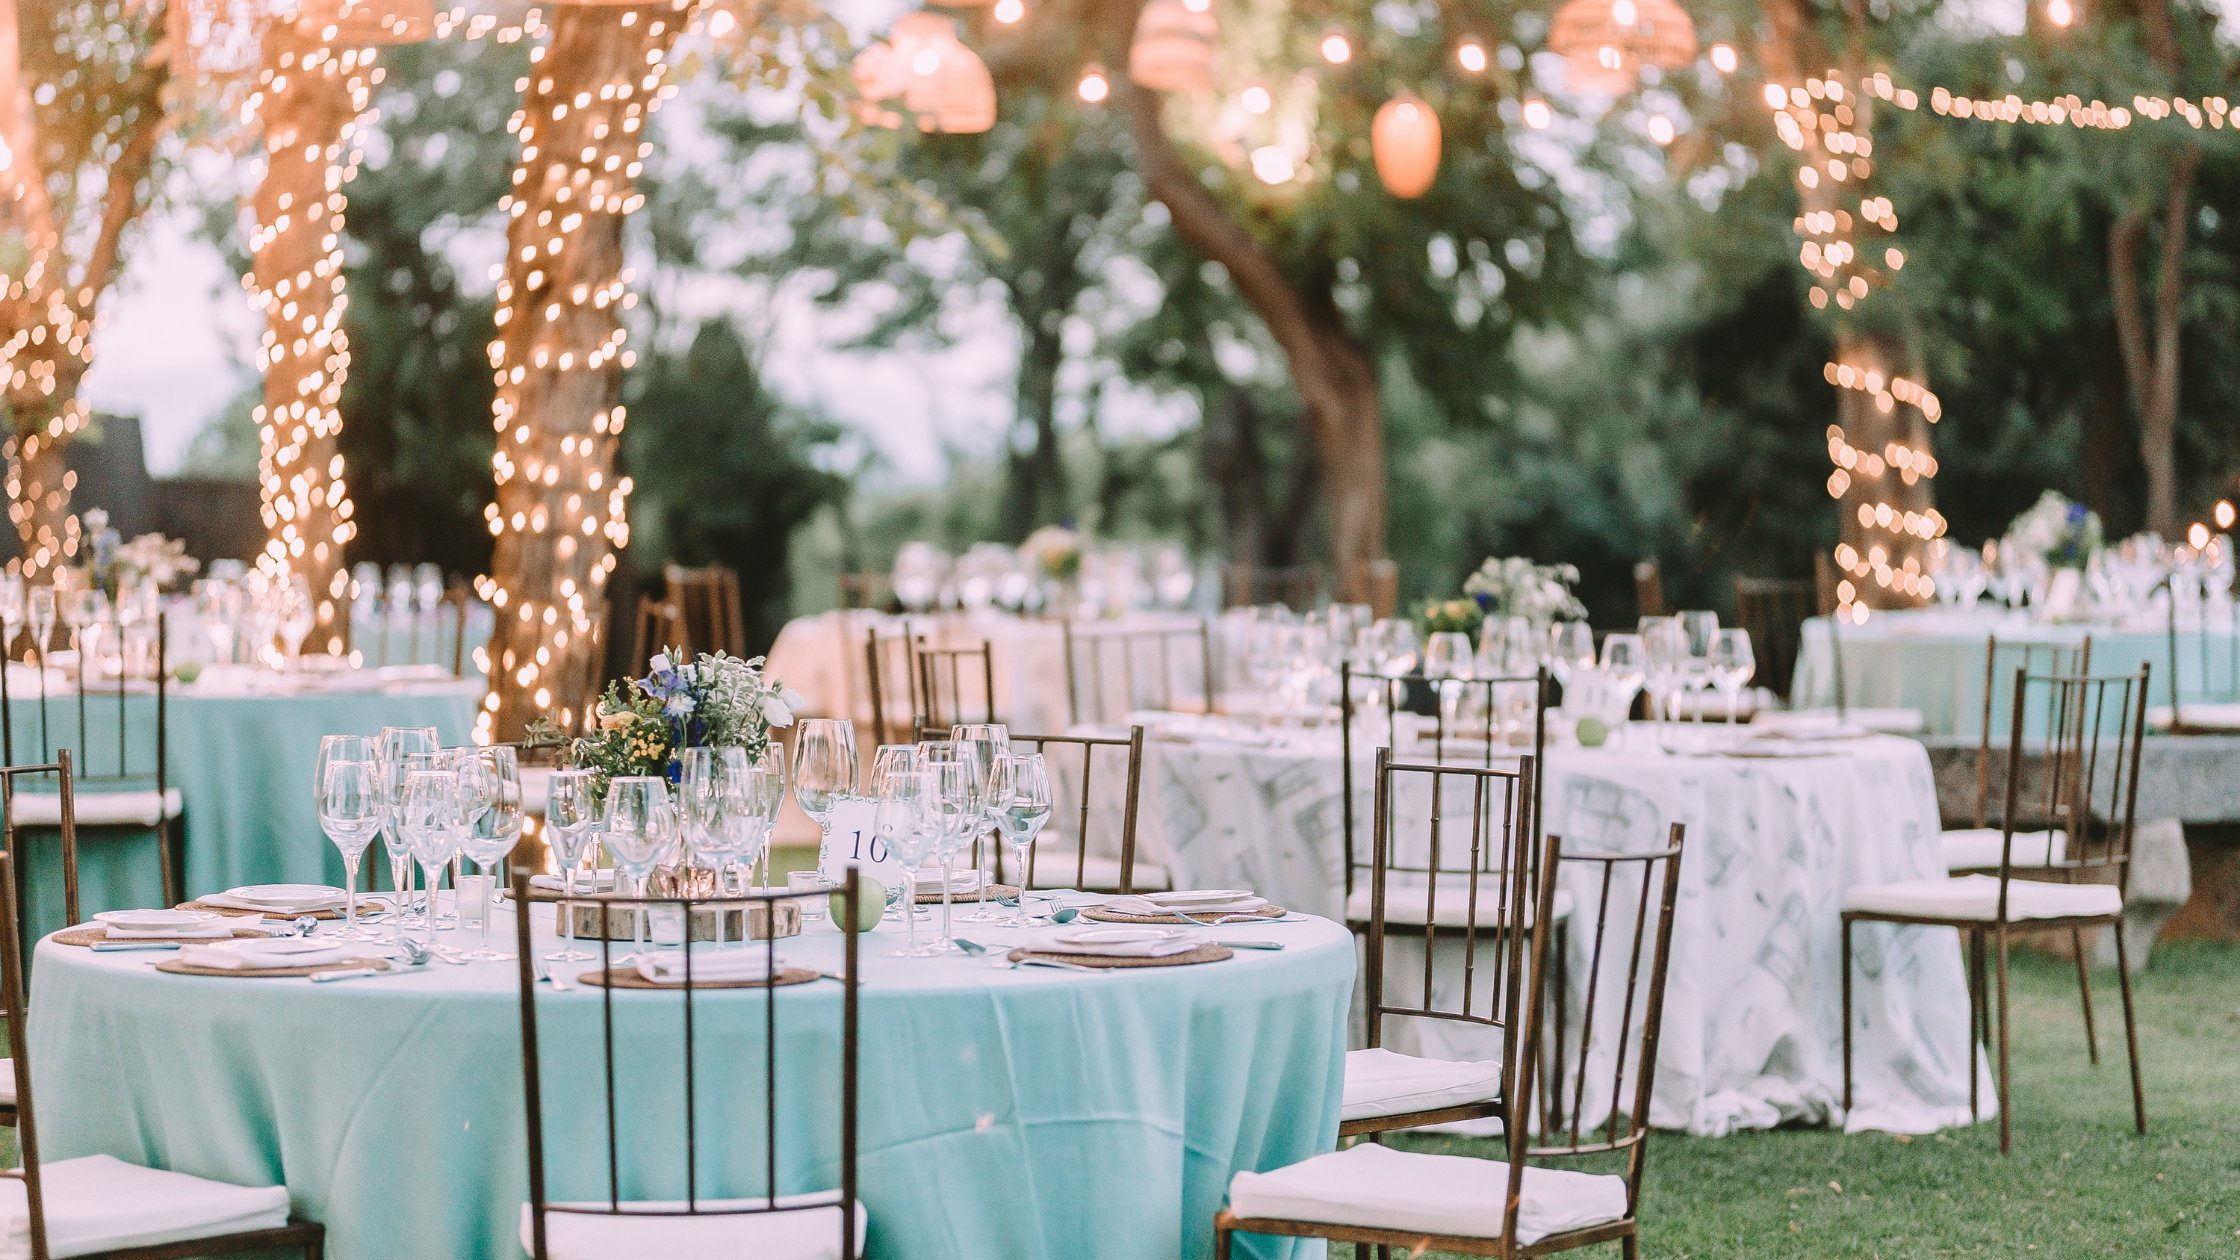 What You Shouldn't (And Should) DIY for Your Wedding